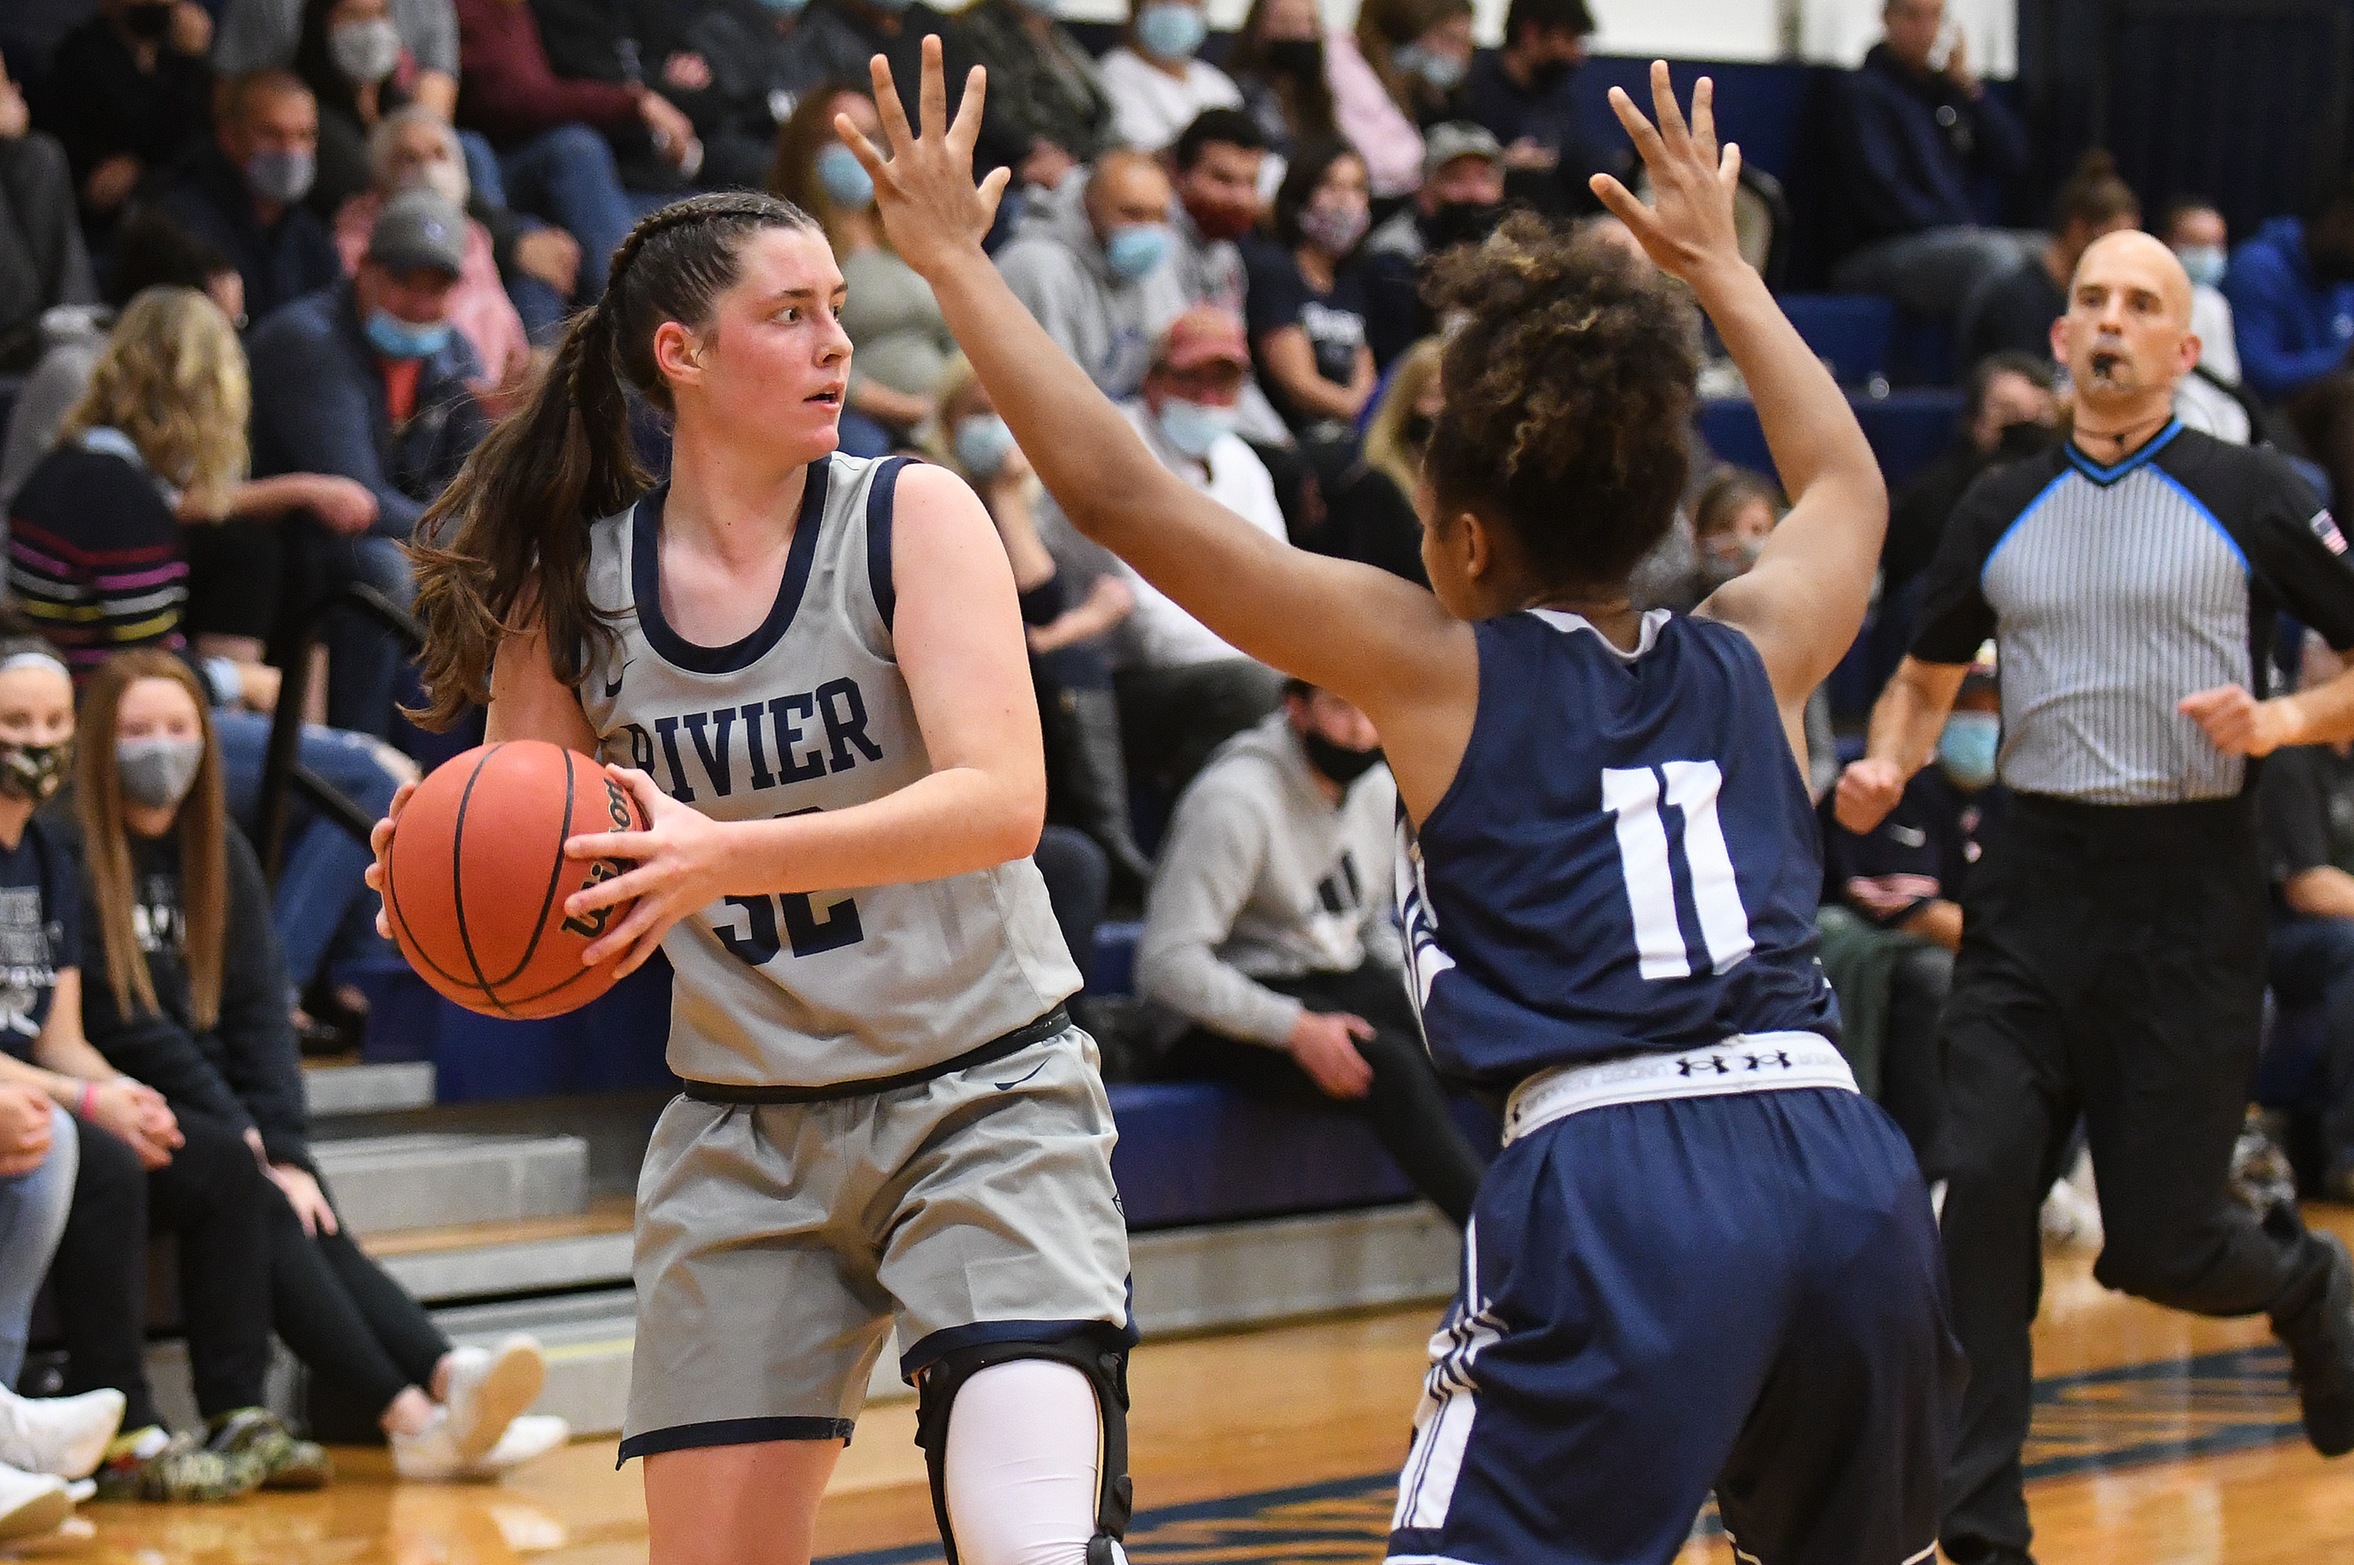 Women’s Basketball Opens Up Conference Play with Loss to Lasell